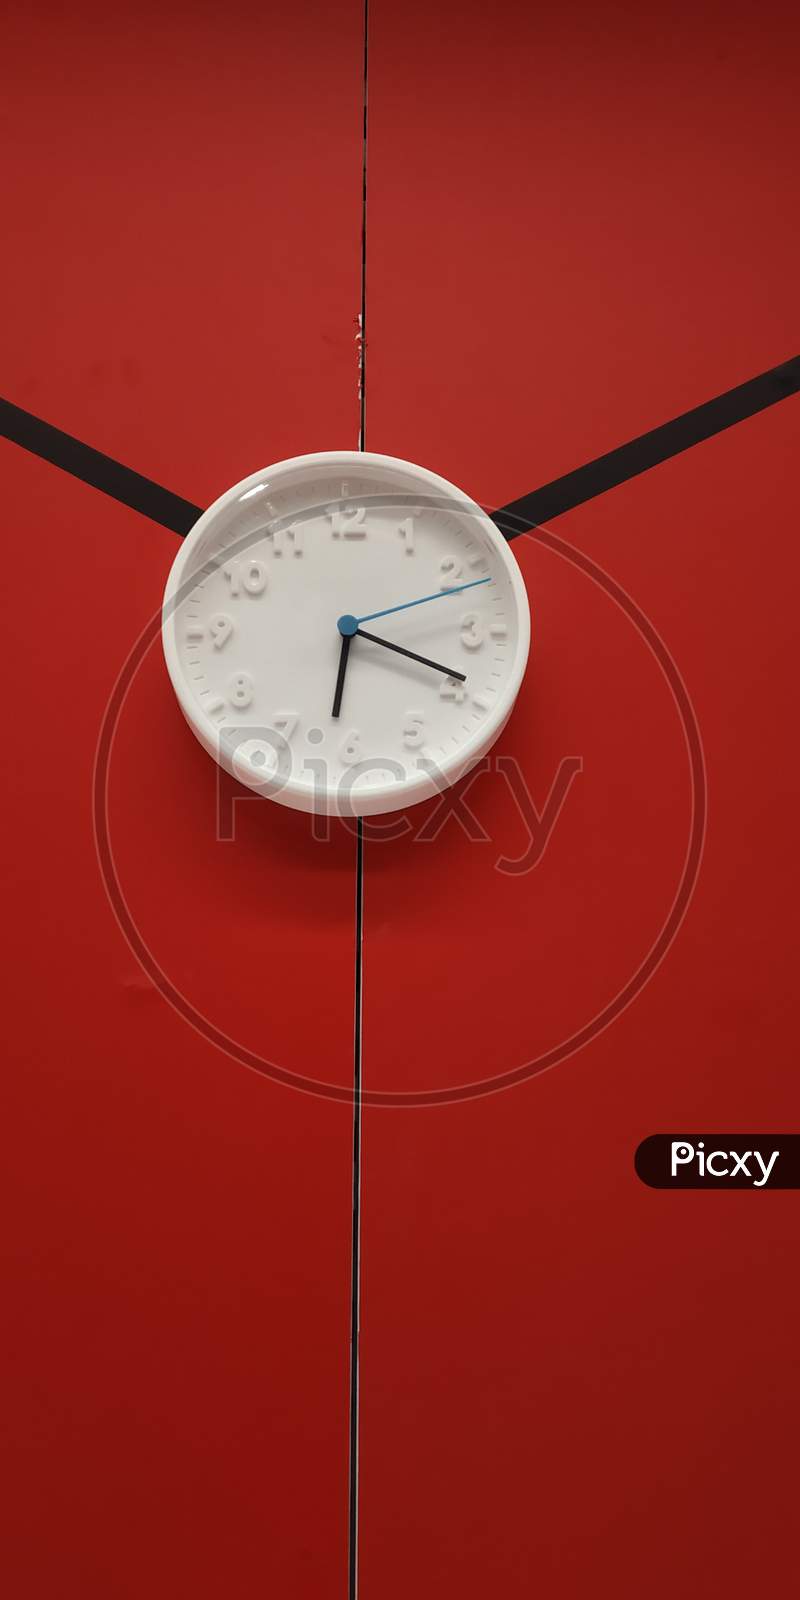 Wall Clock Over a Red Wall